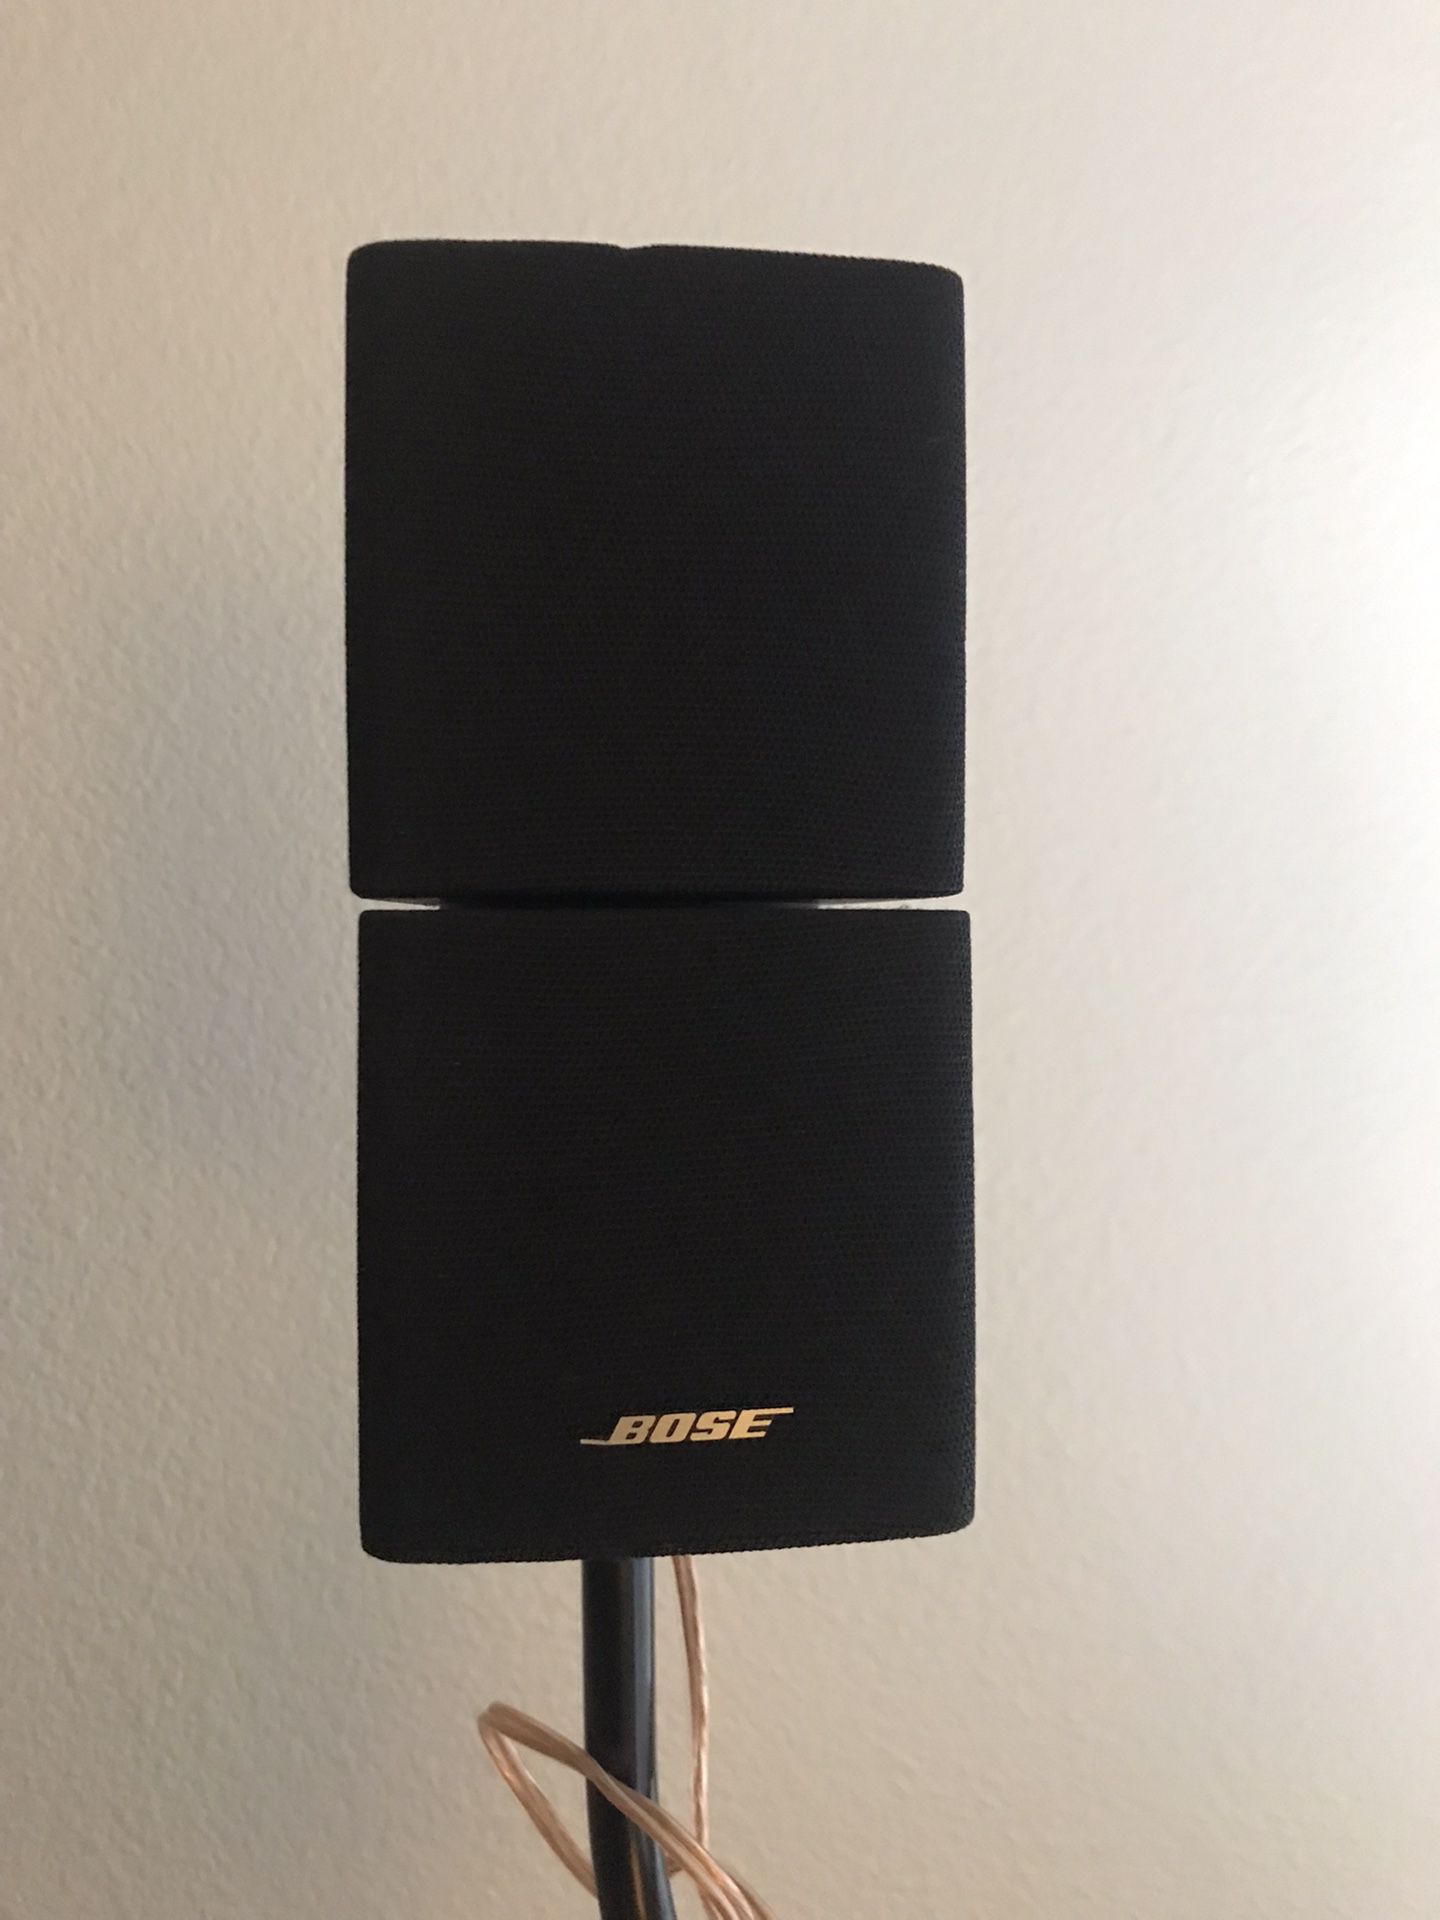 Two Bose Speakers 